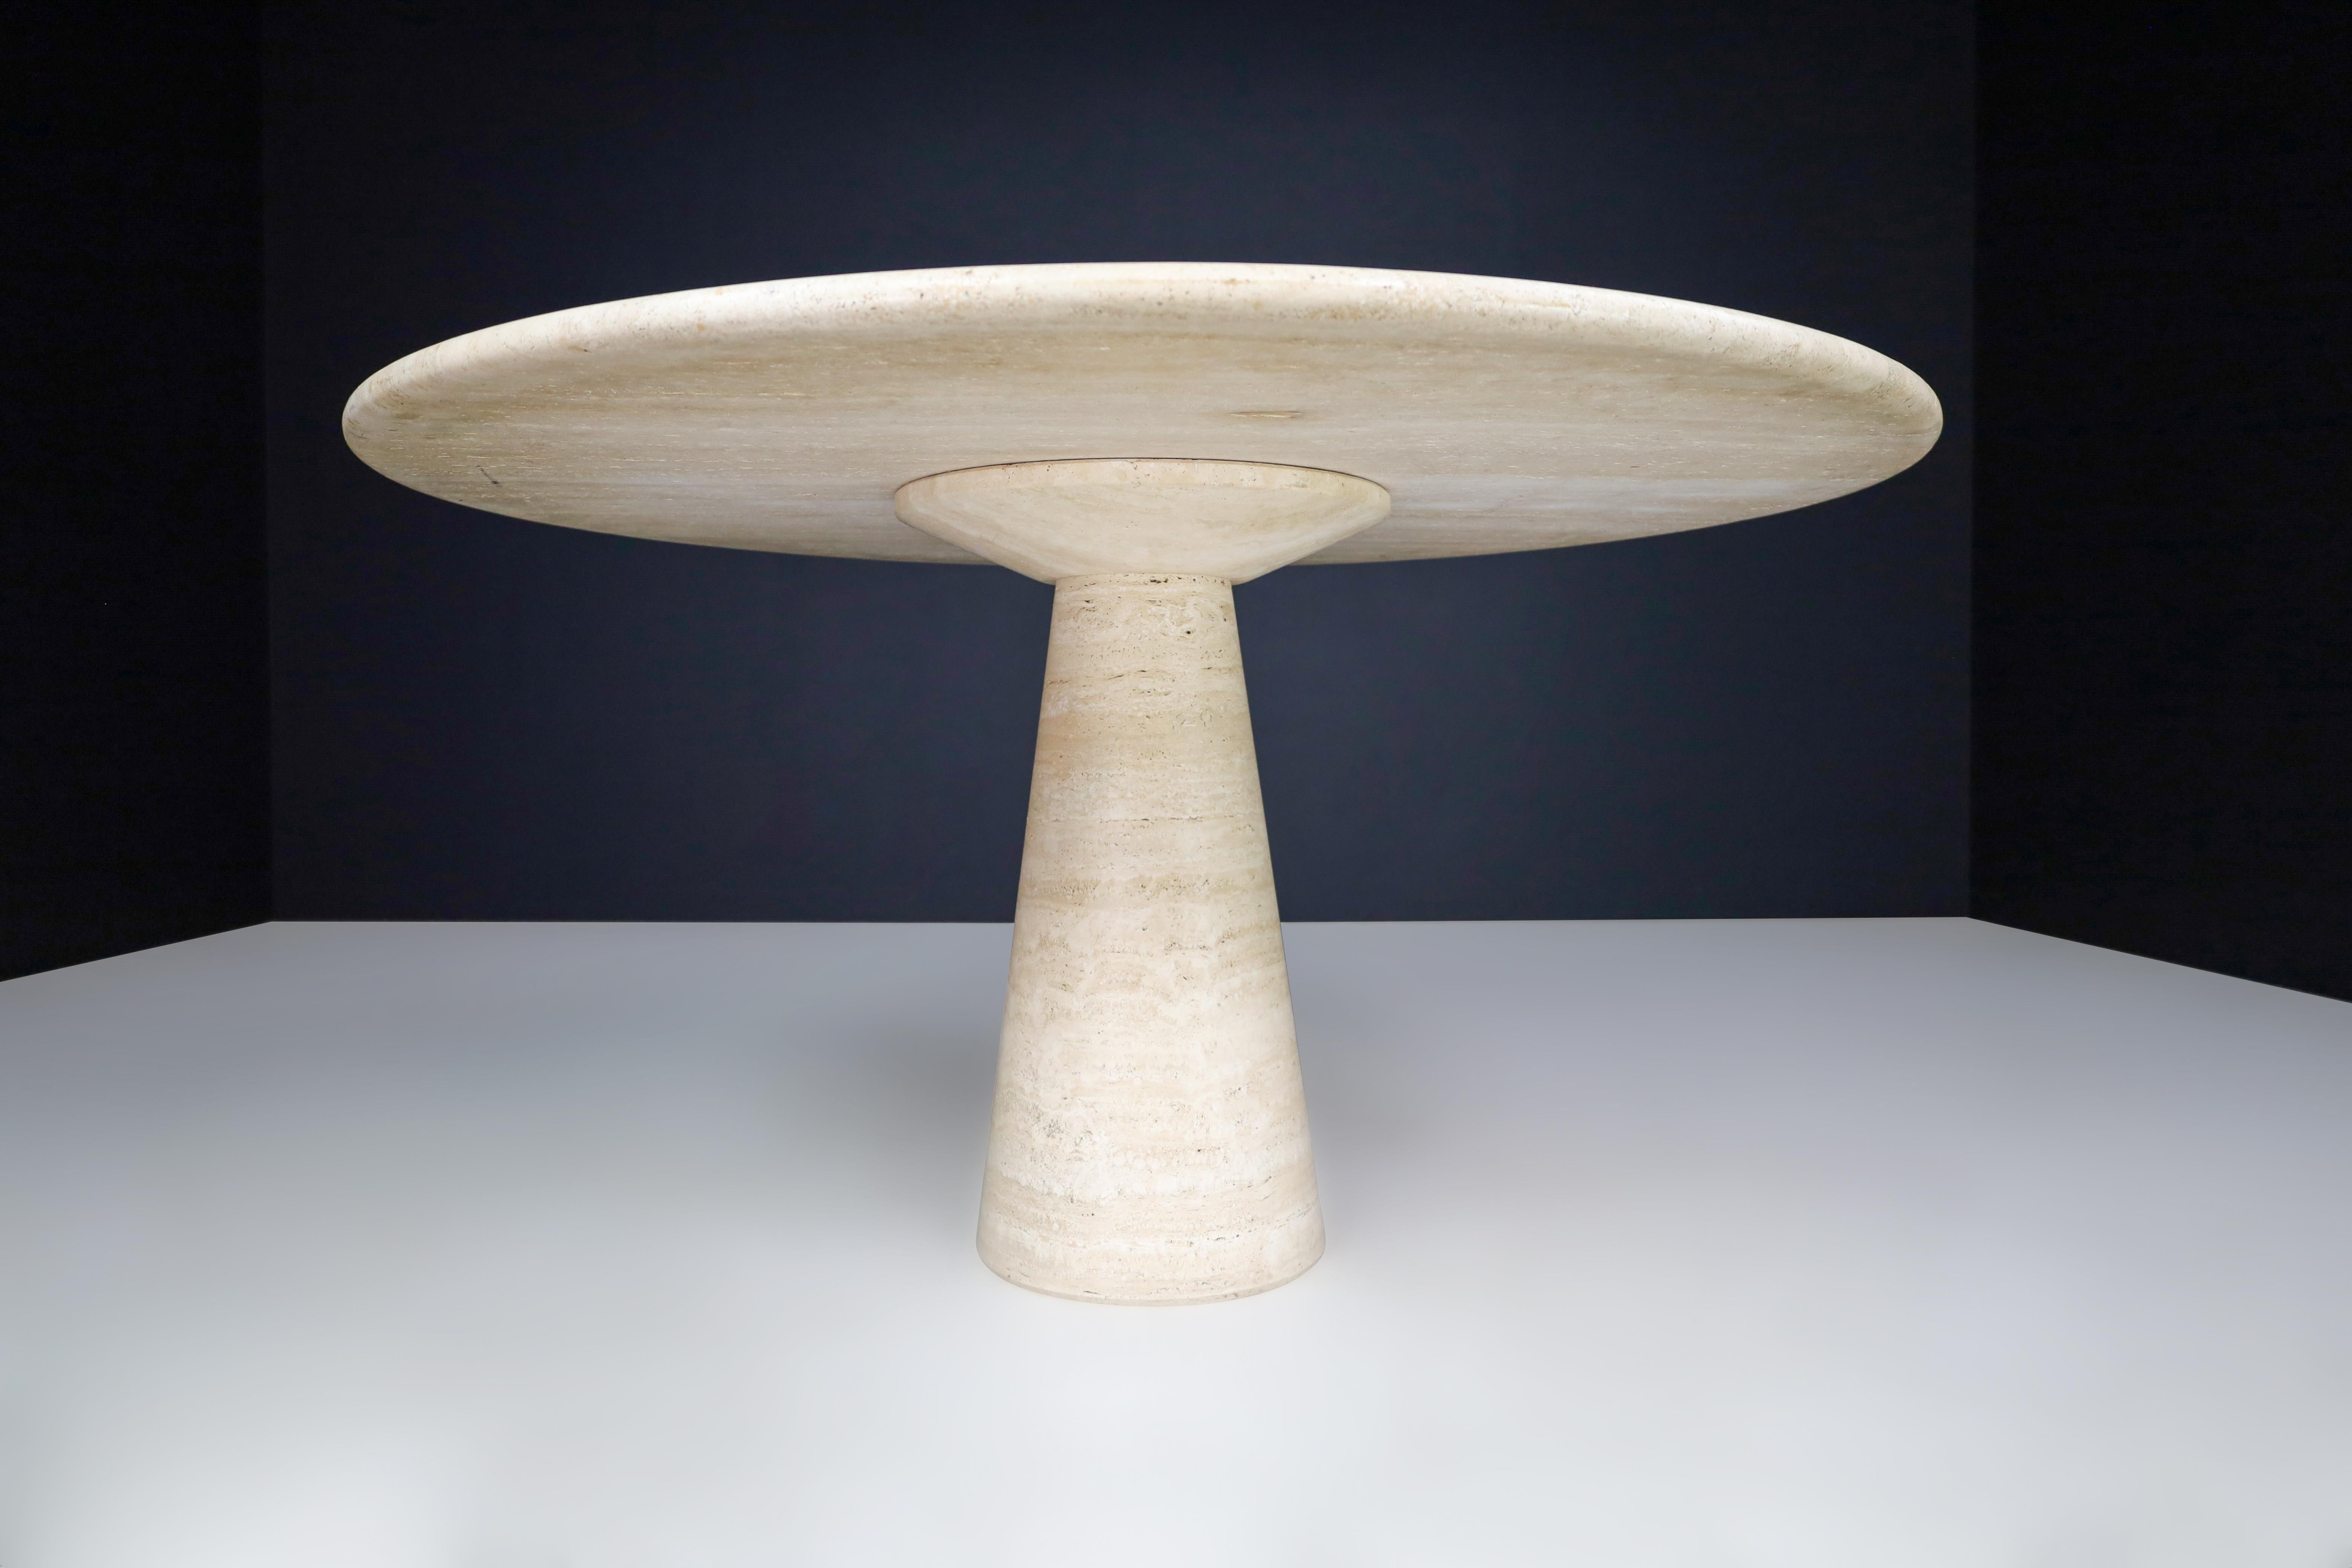 Mid-Century Modern Round Travertine Dining or Centre Table, Italy, 1970s  

This stunning large round travertine dining table or center table was made in Italy in the 1970s. It has a modern and minimalist design that is the style of Angelo